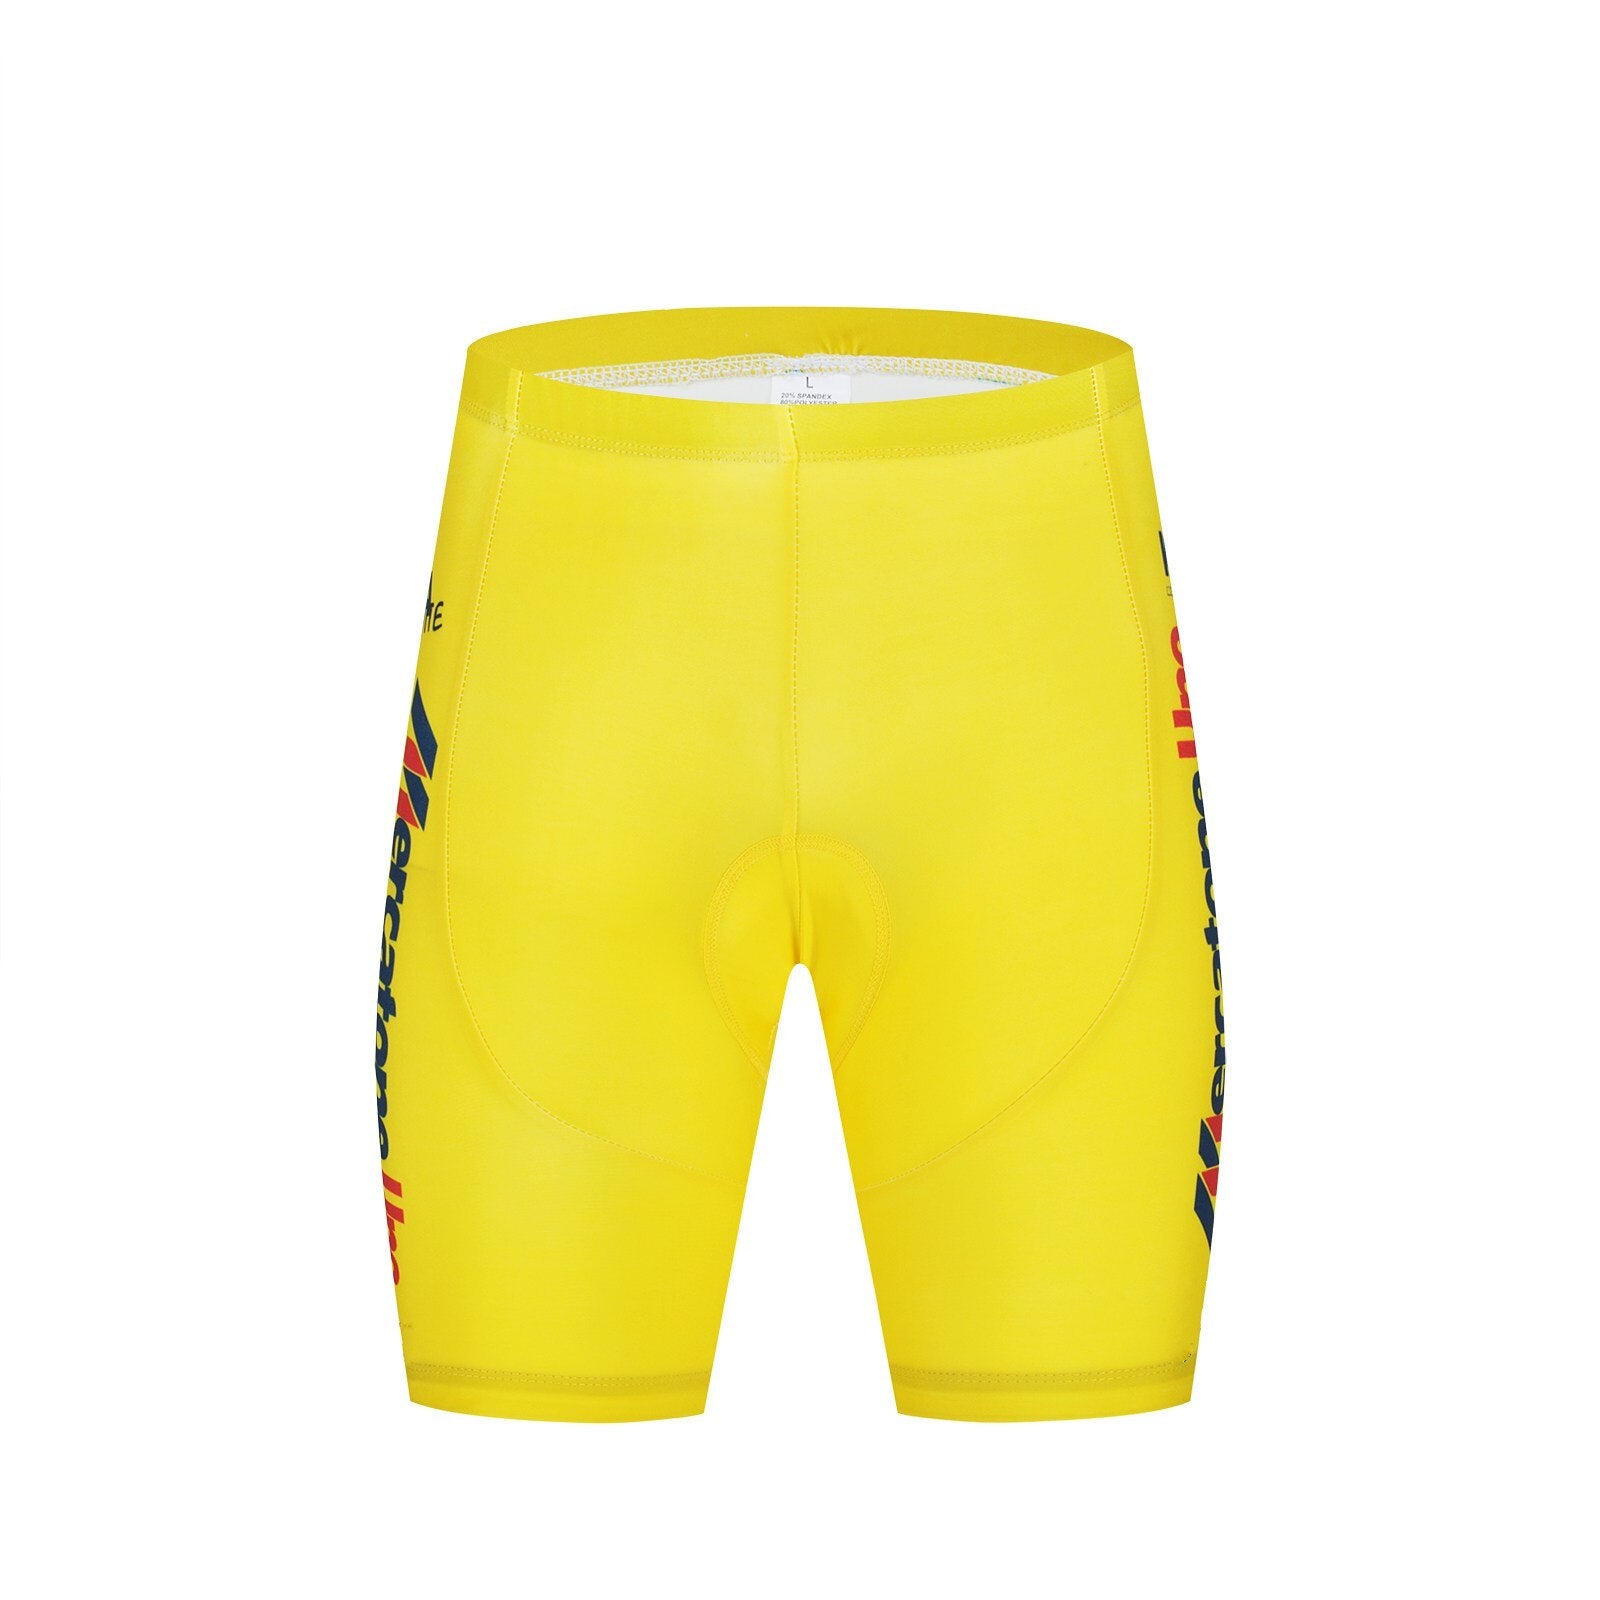 Marco Yellow Retro Cycling Jersey Short sleeved suit